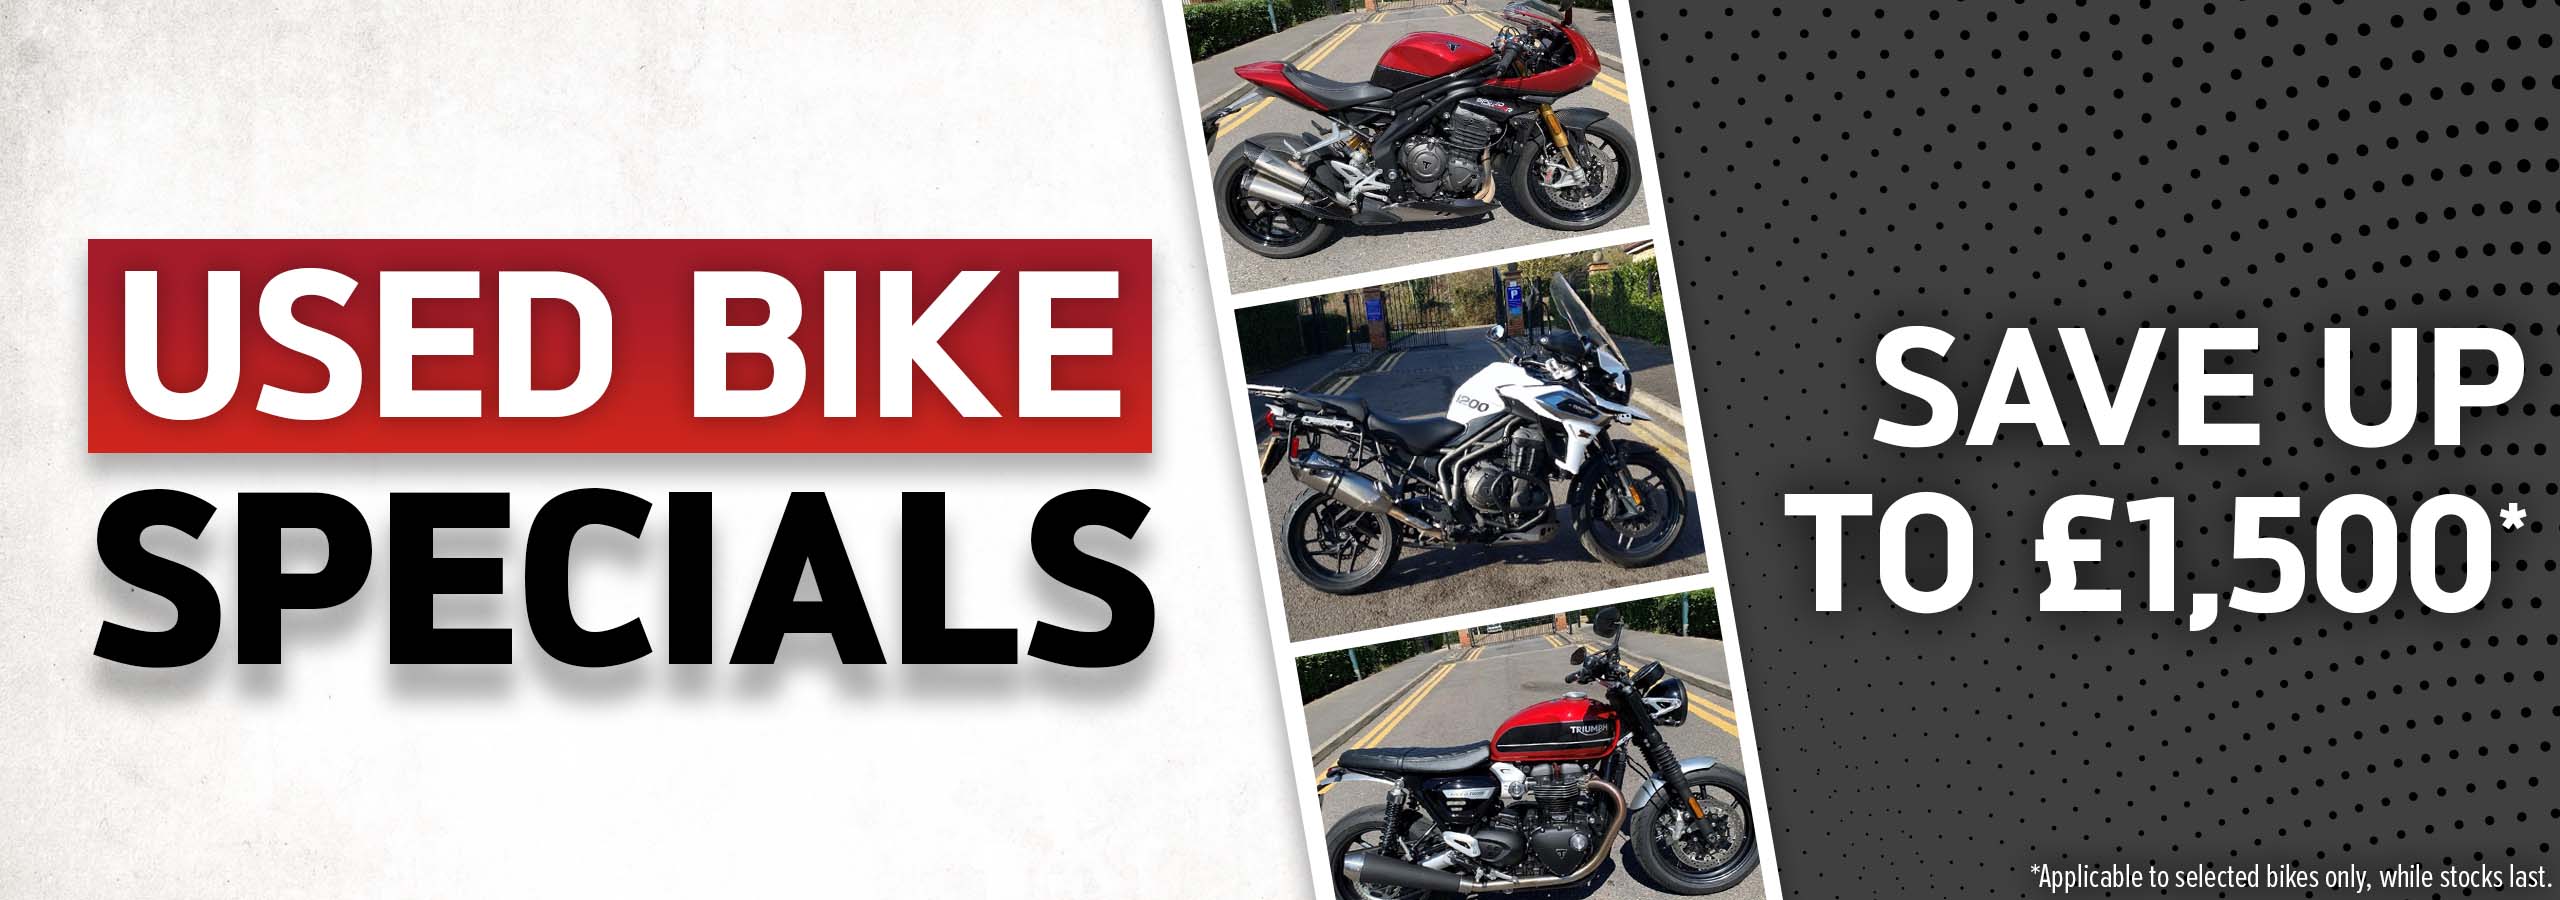 A fantastic range and some great prices: Used Trimph motorcycles for sale in our Used Bike Specials at Laguna Motorcycles in Maidstone